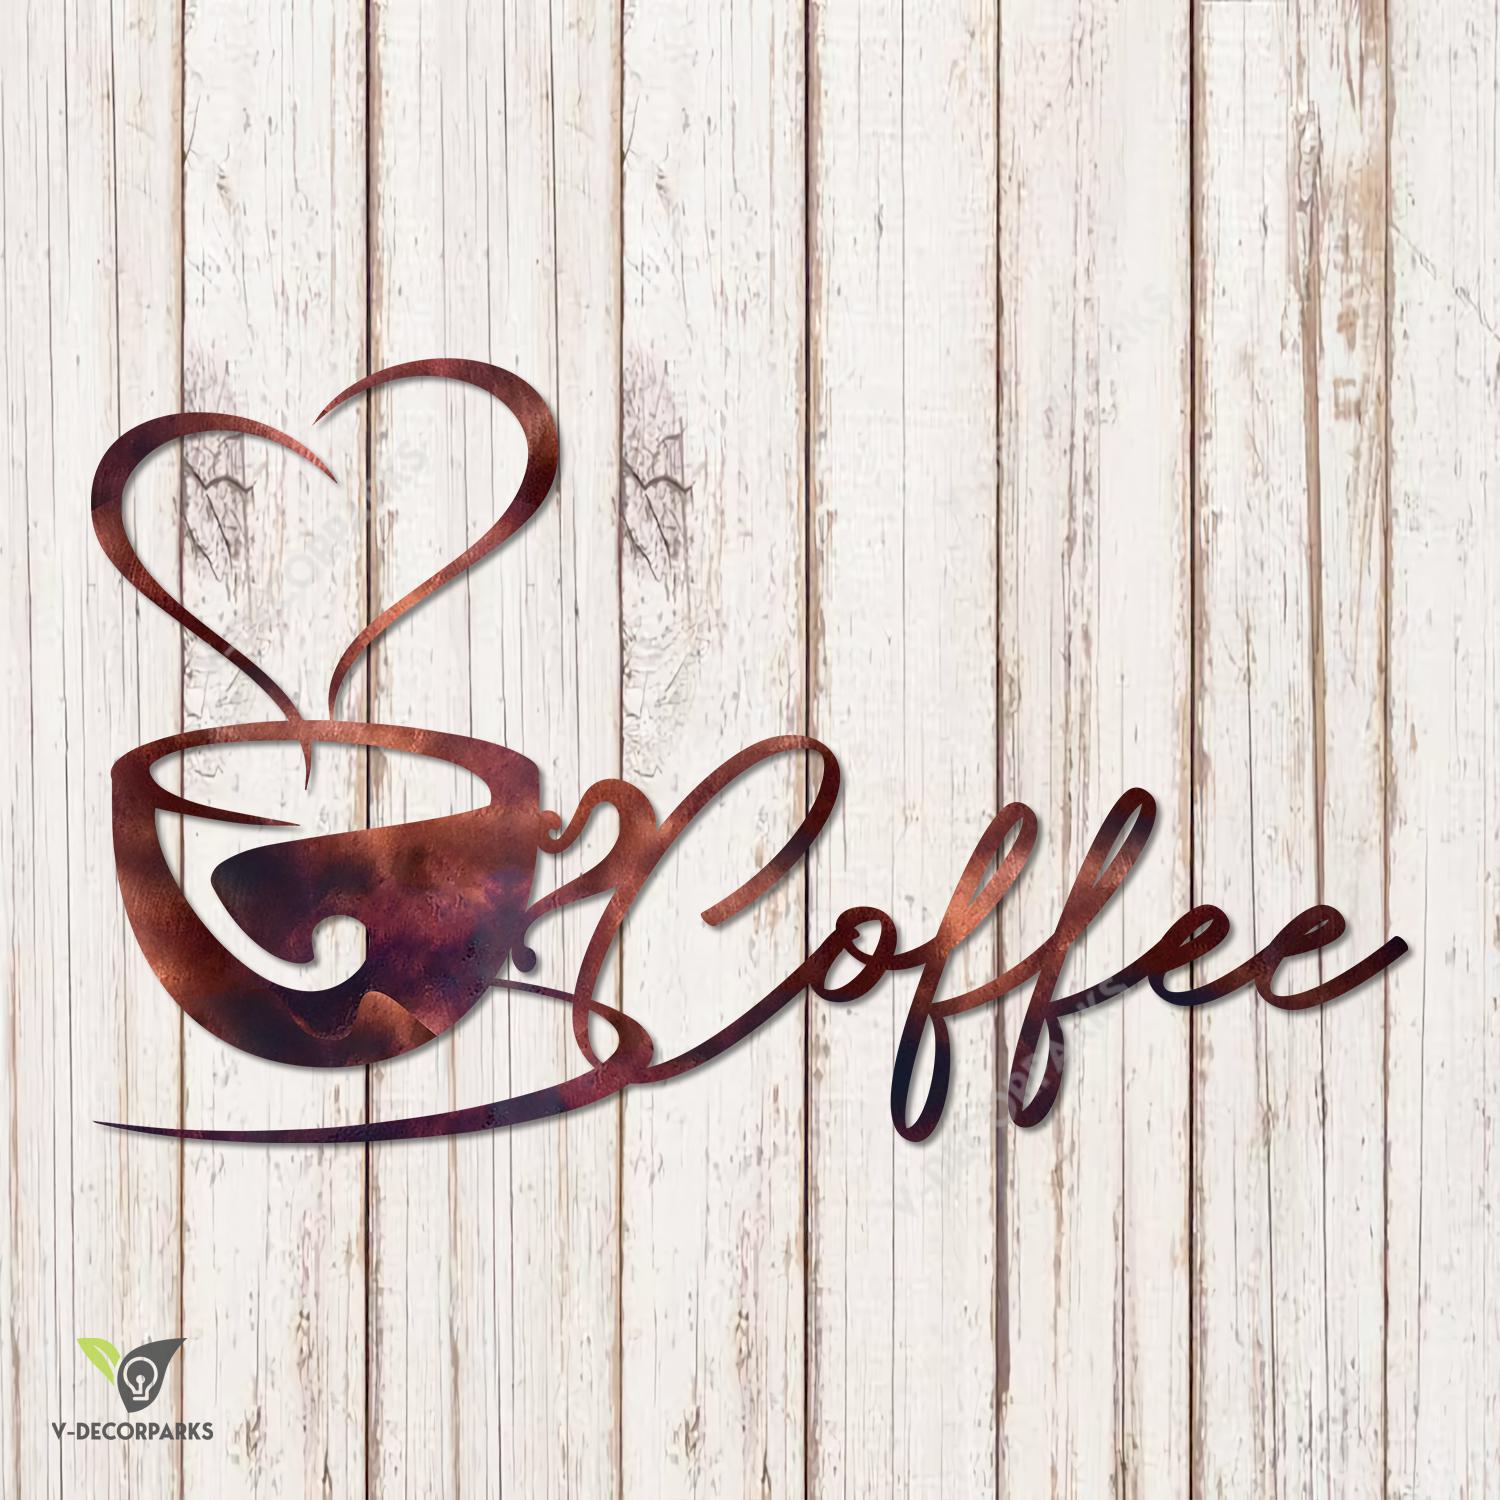 Copper Coffee With Heart Metal Wall Art, Coffee Stainless Artwork